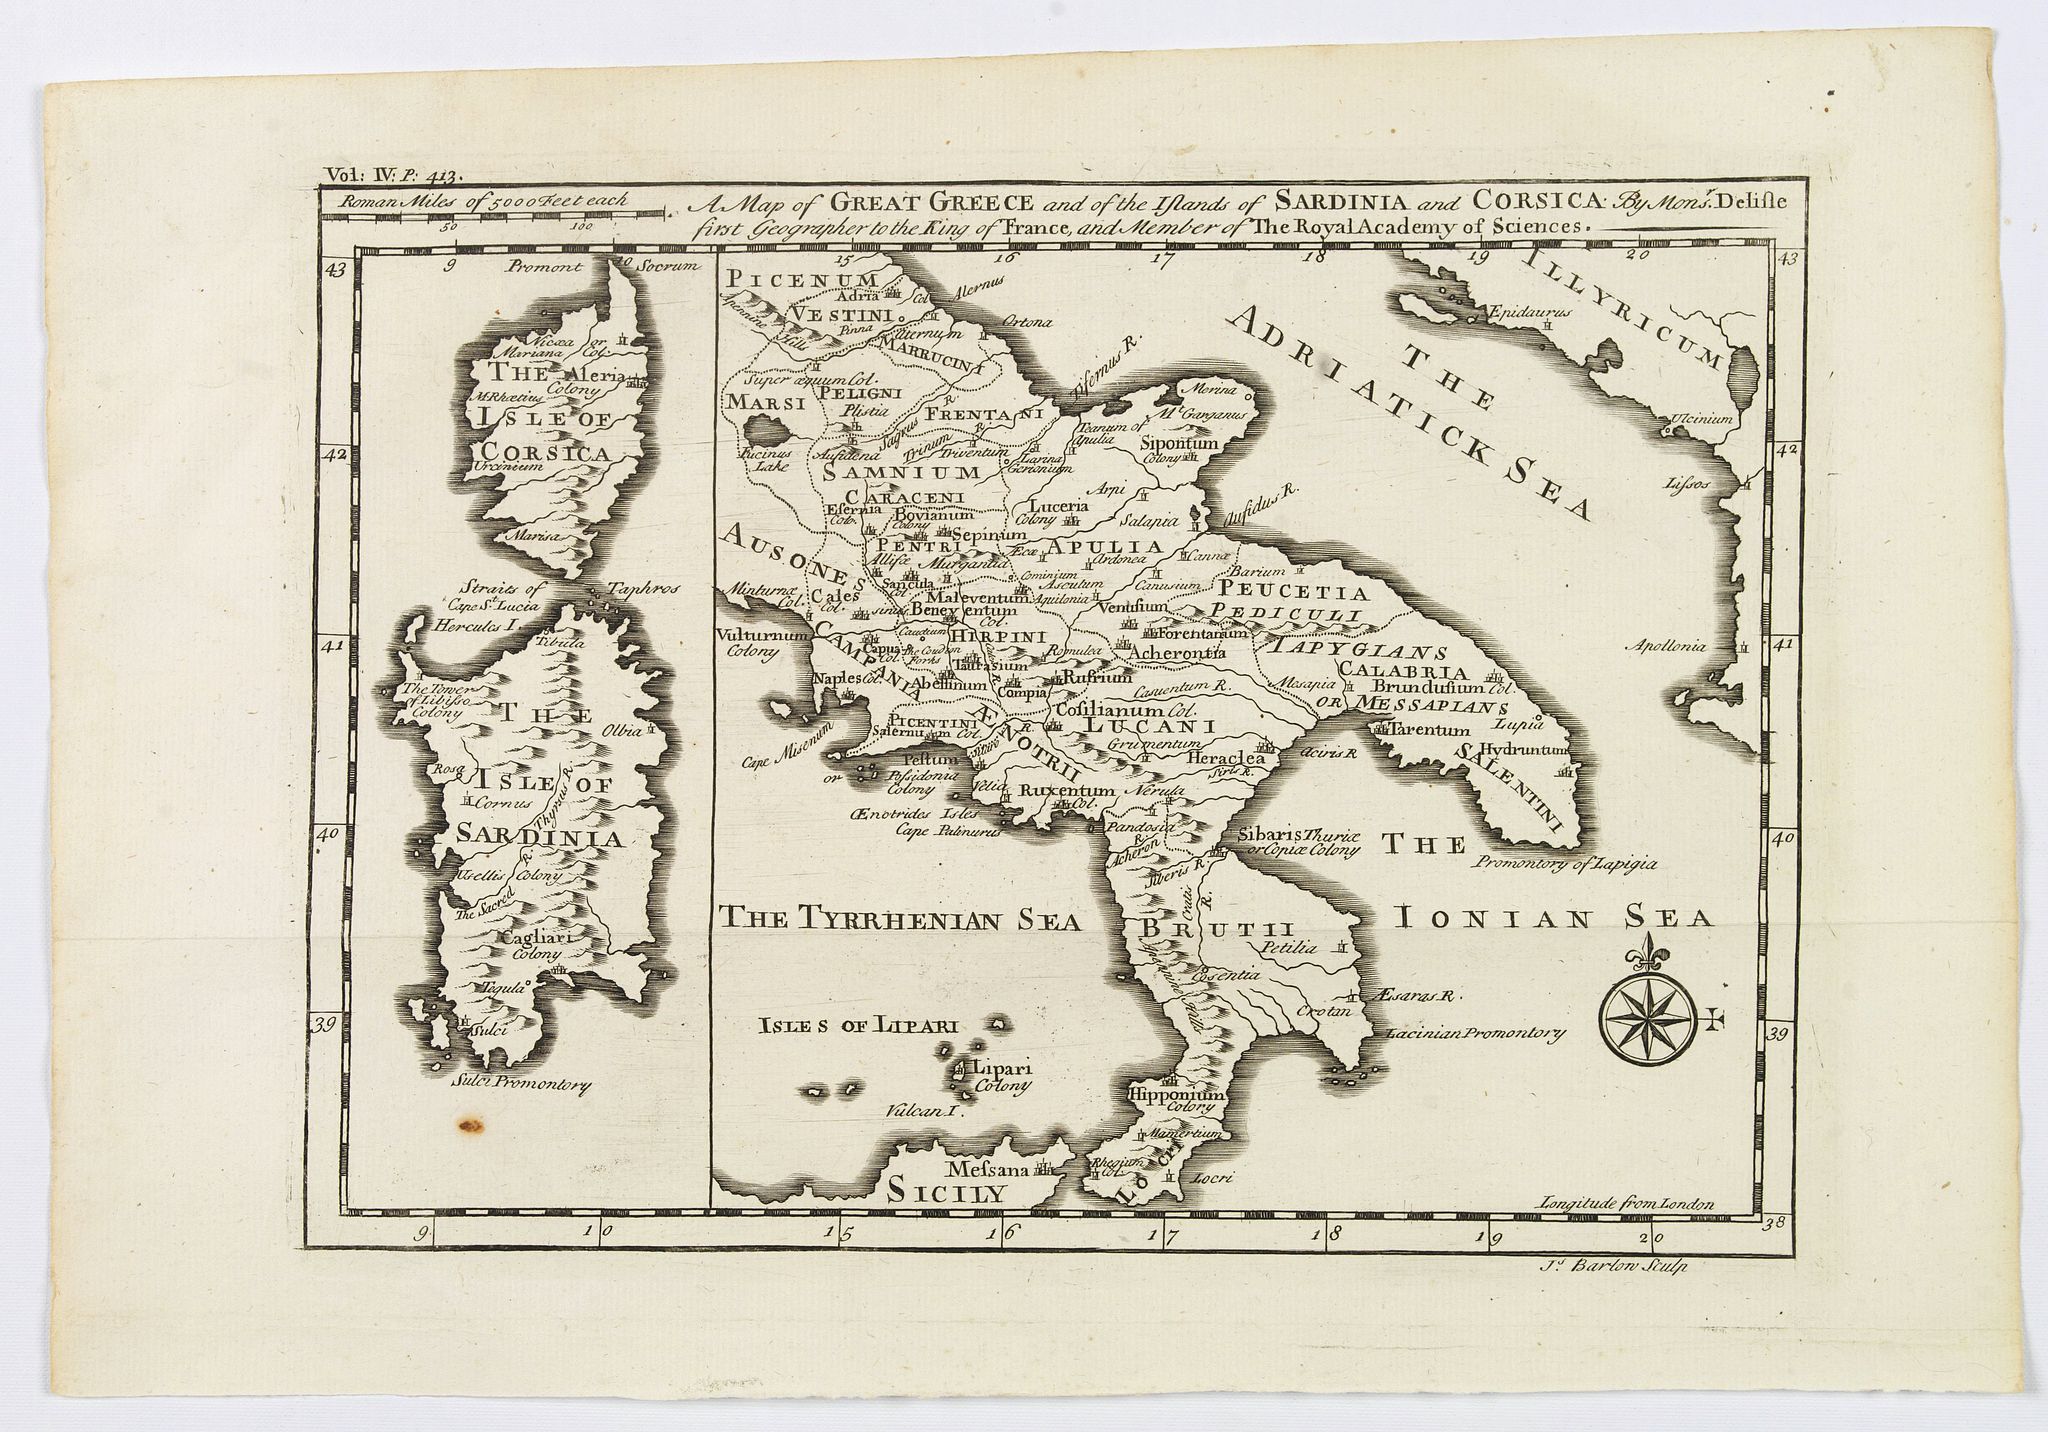 A Map of Great Greece and of the Islands of Sardinia and Corsica. . .